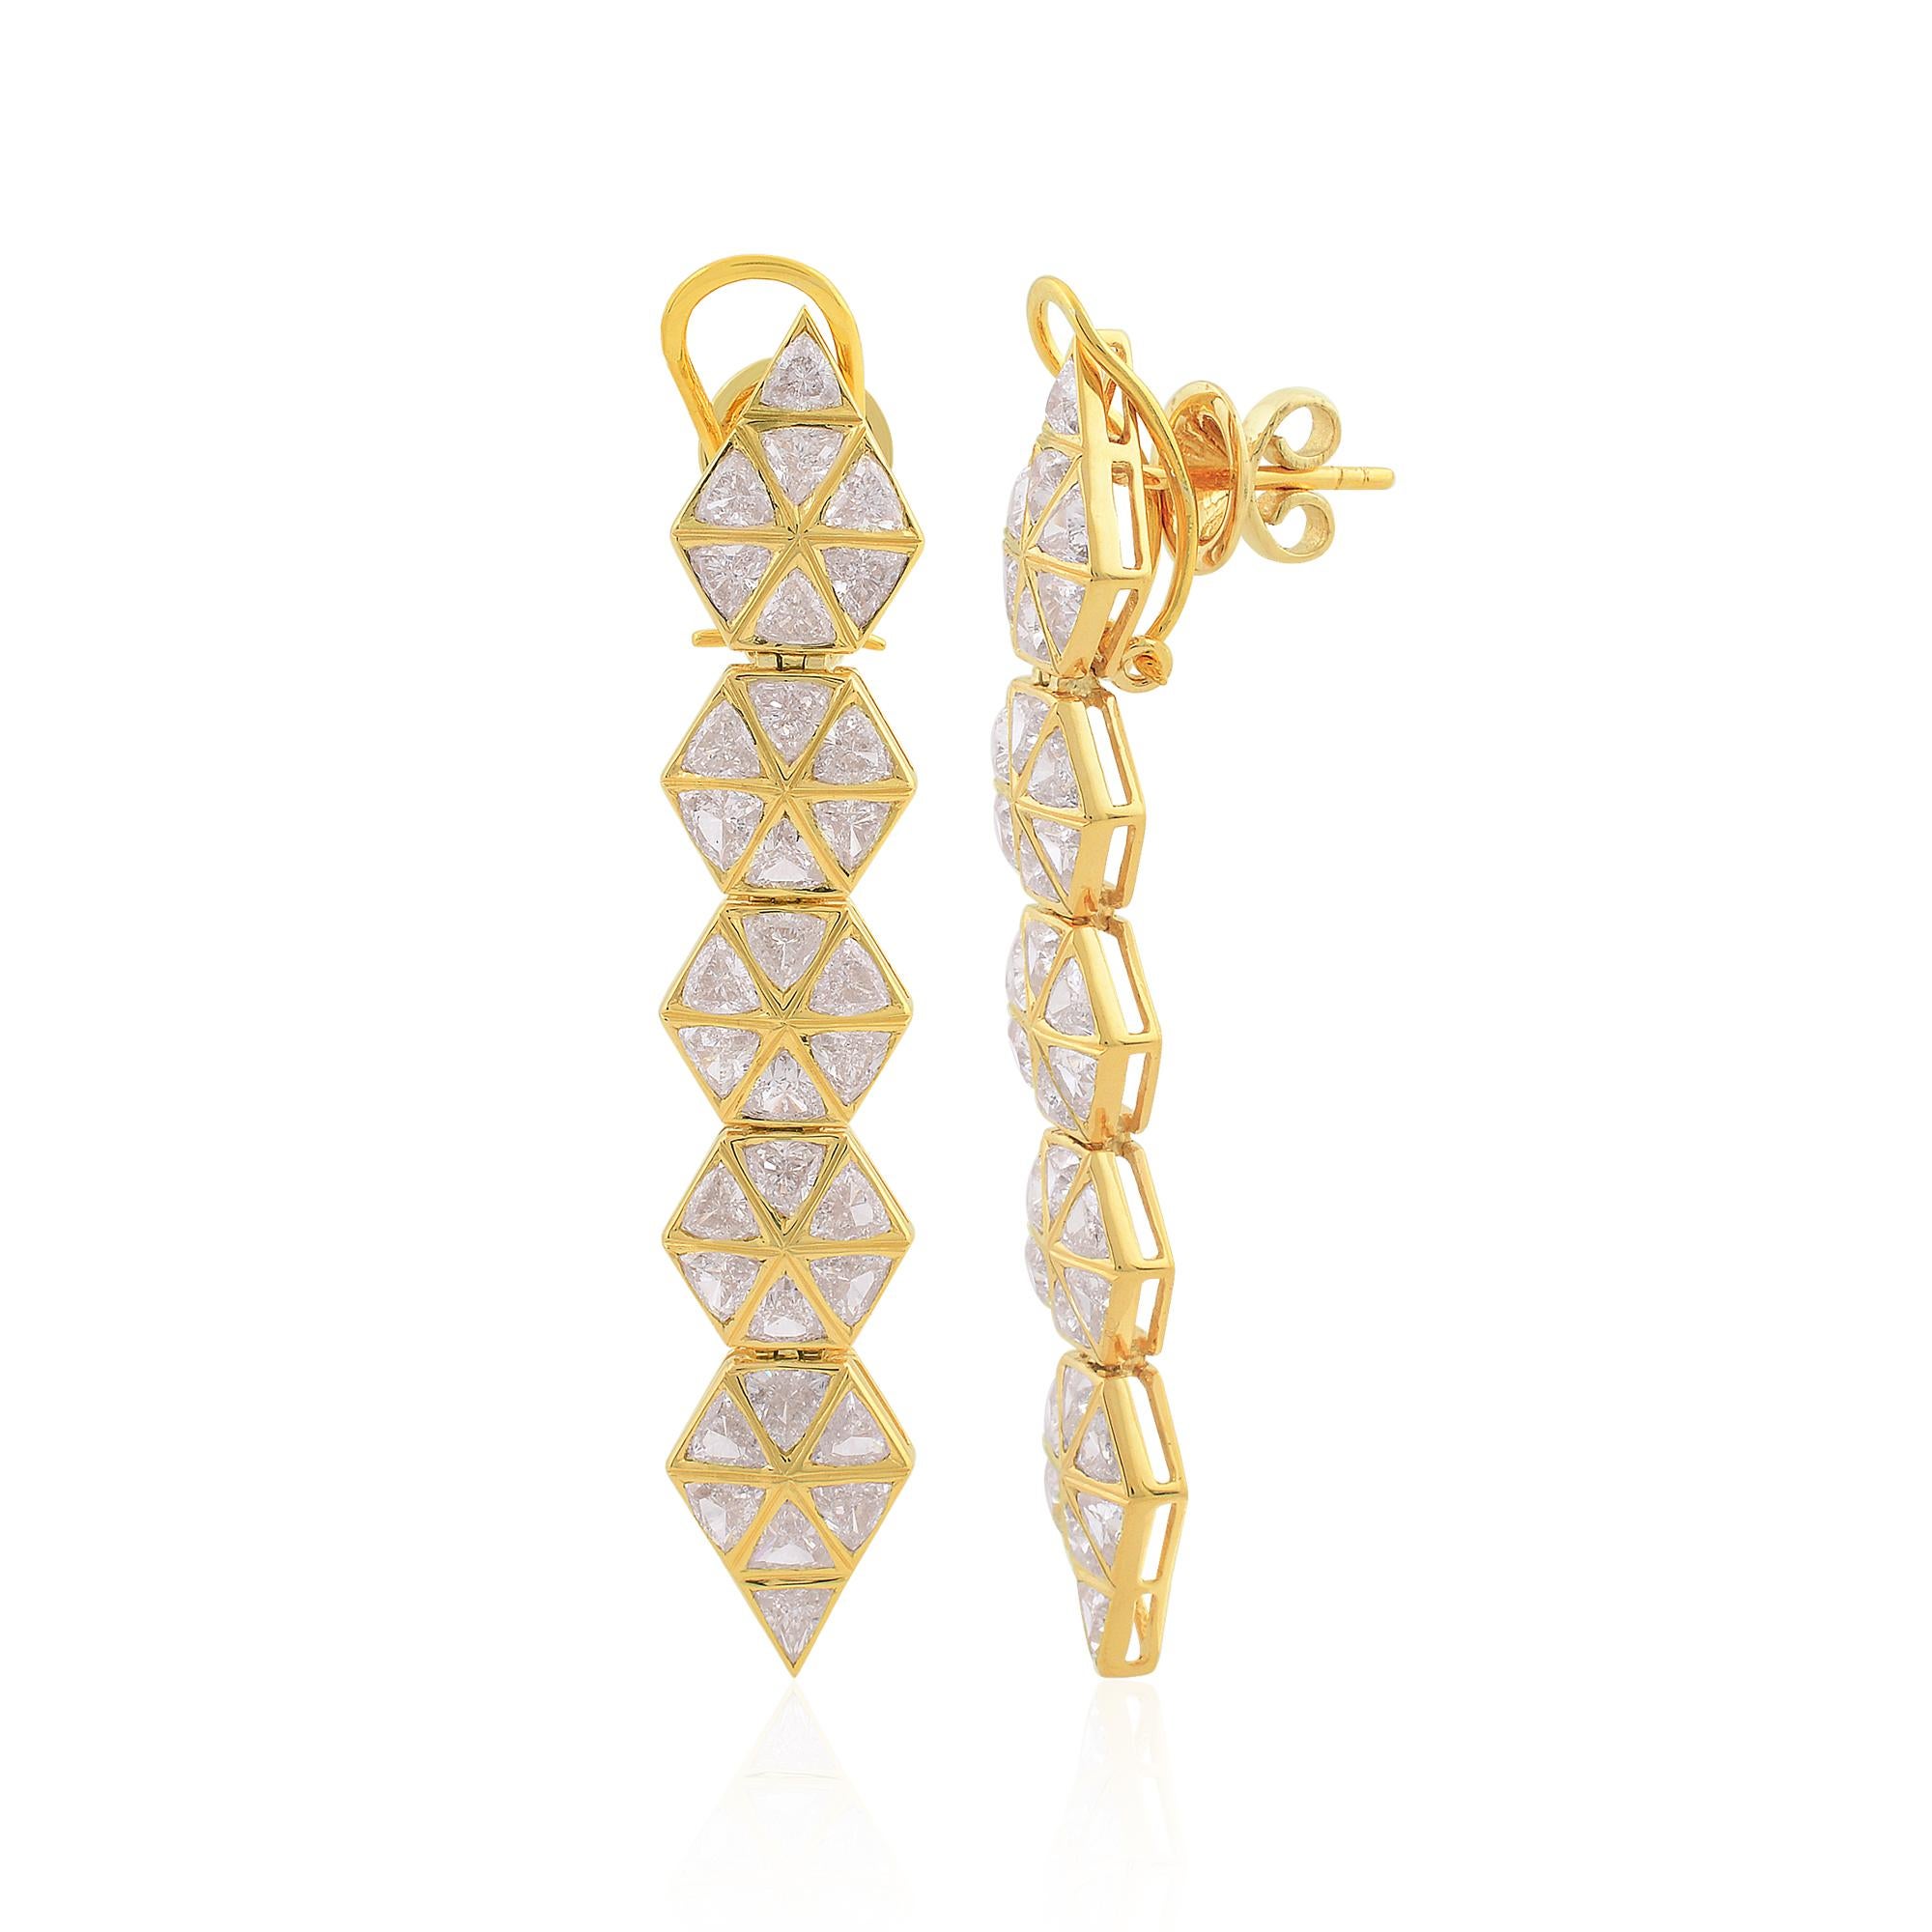 Item Code :- SEE-1530
Gross Weight :- 8.36 gm
14k Yellow Gold Weight :- 7.41 gm
Diamond Weight :- 4.75 carat  ( AVERAGE DIAMOND CLARITY SI1-SI2 & COLOR H-I )
Earrings Length :- 48 mm approx.
✦ Sizing
.....................
We can adjust most items to